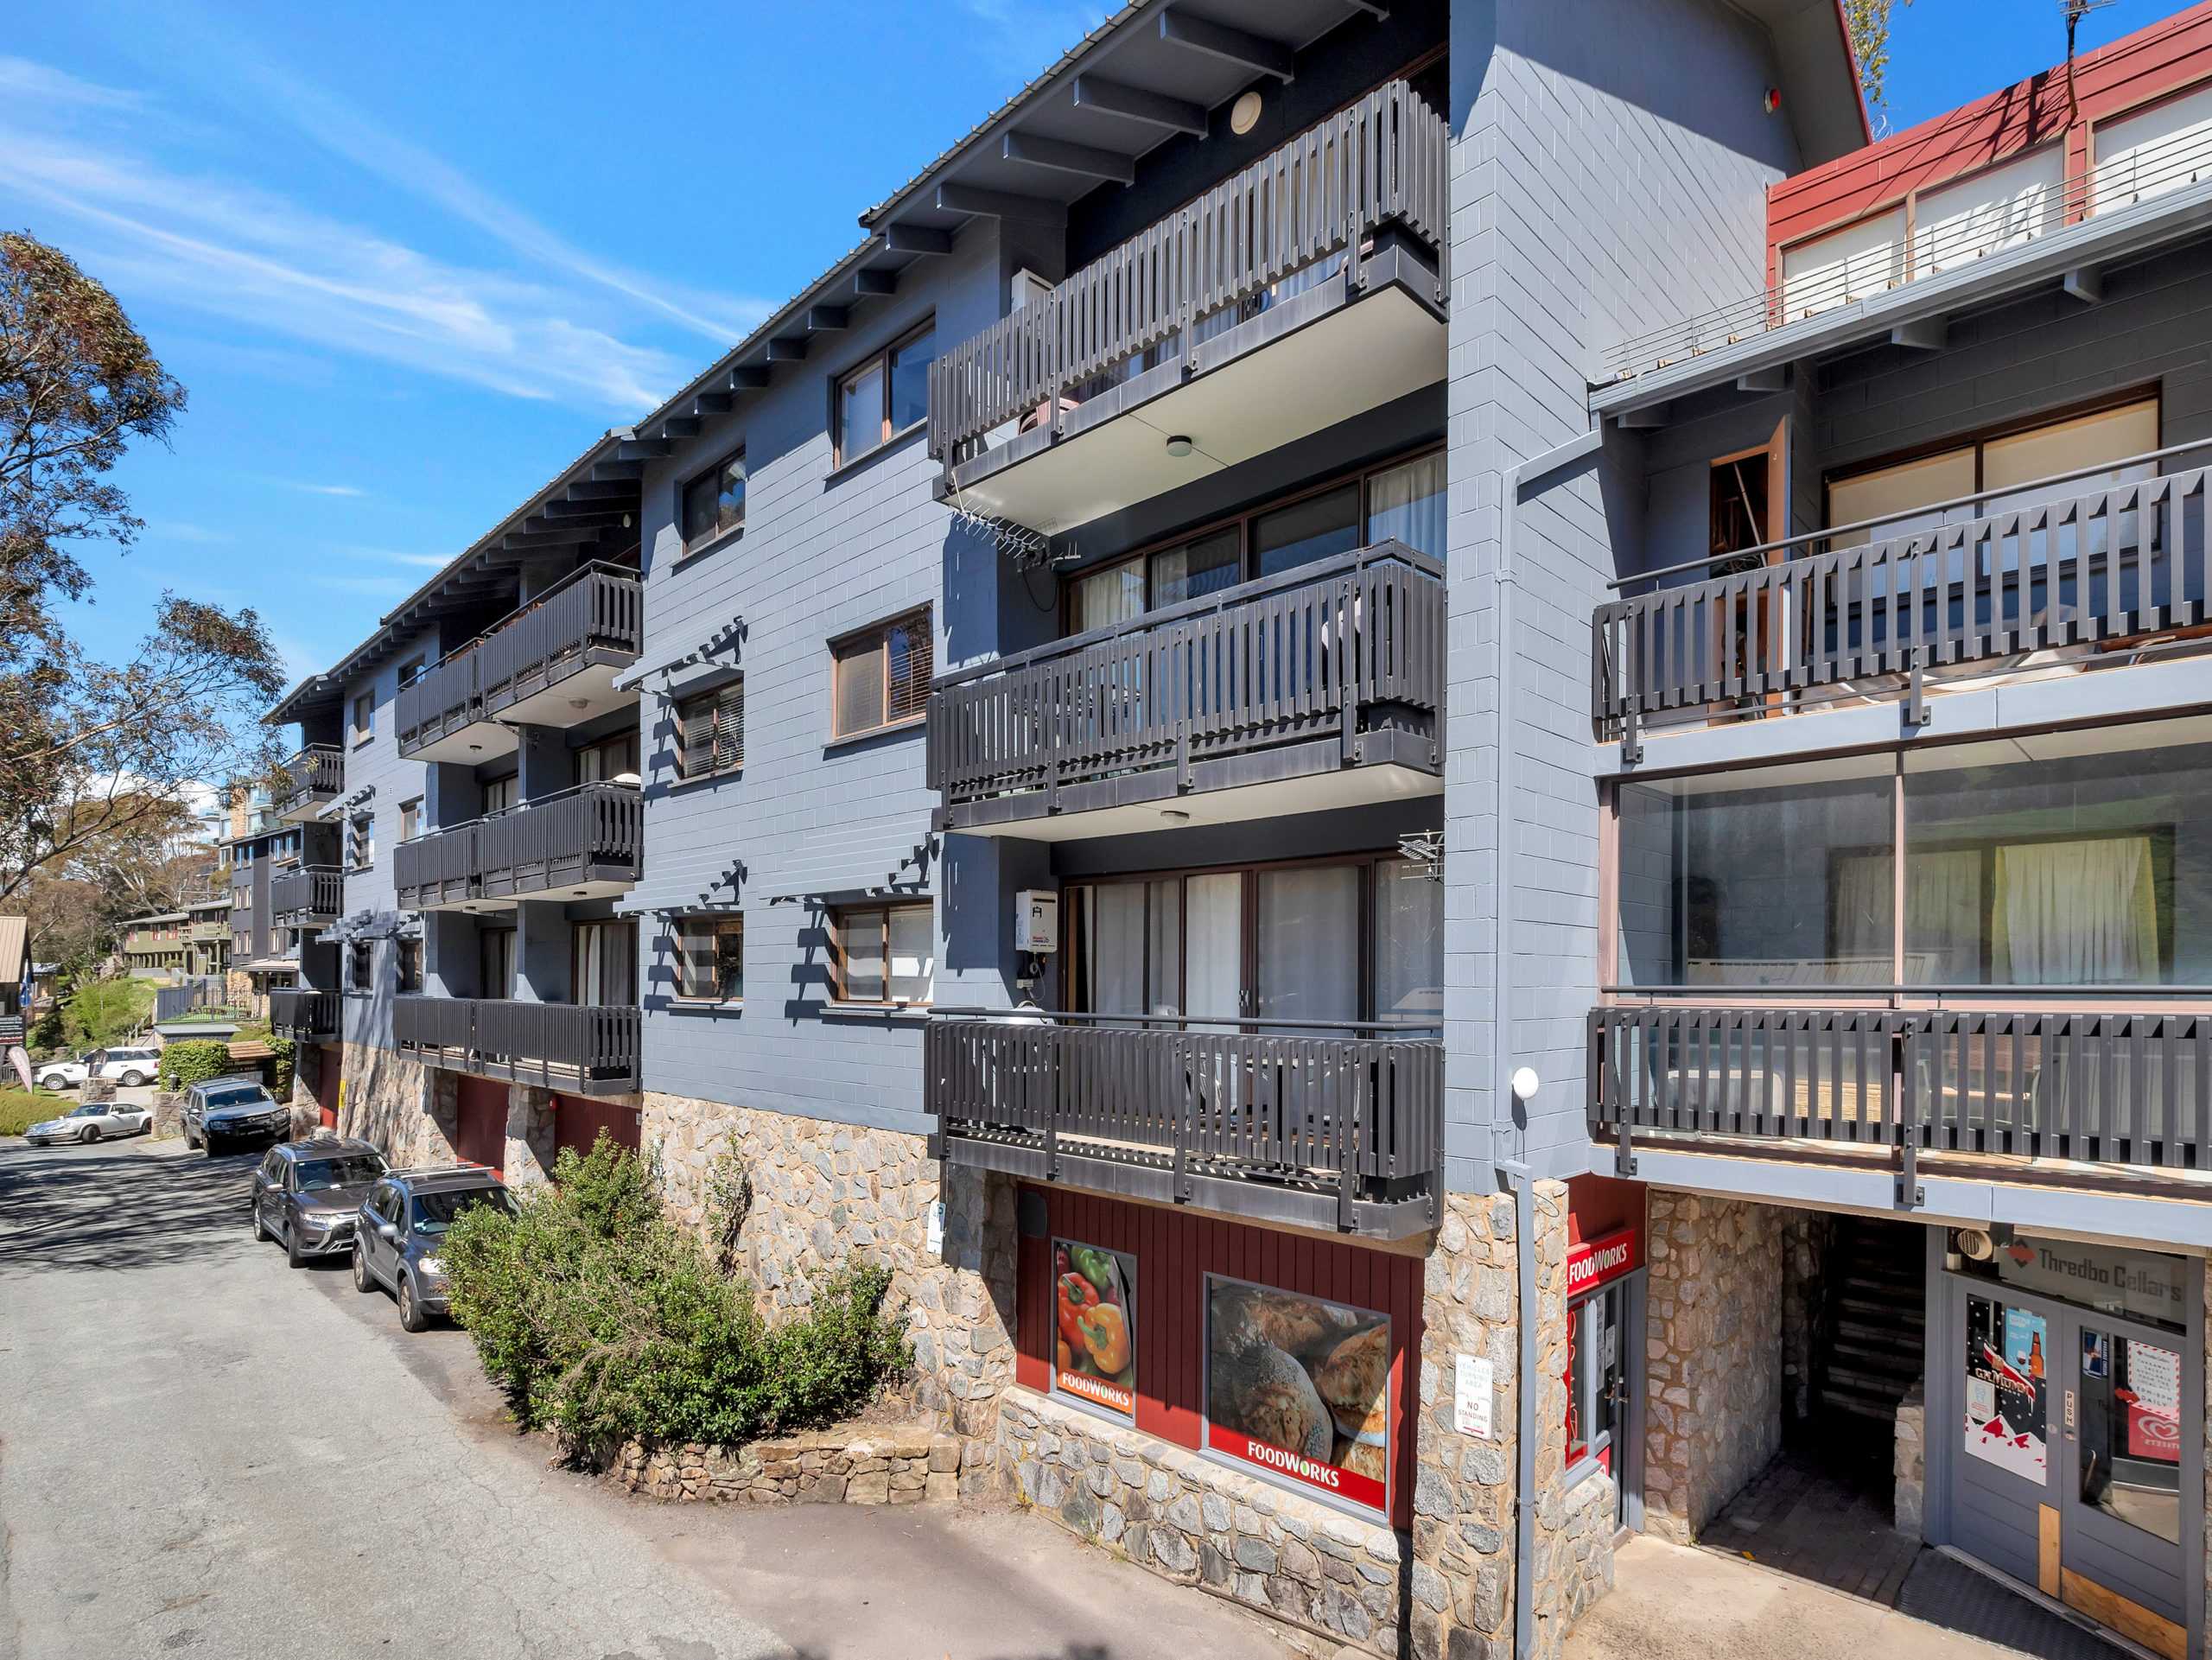 Fully Furnished 2 Bedroom Apartment with Stunning Mountain and River Views – Offers Invited Over $950,000